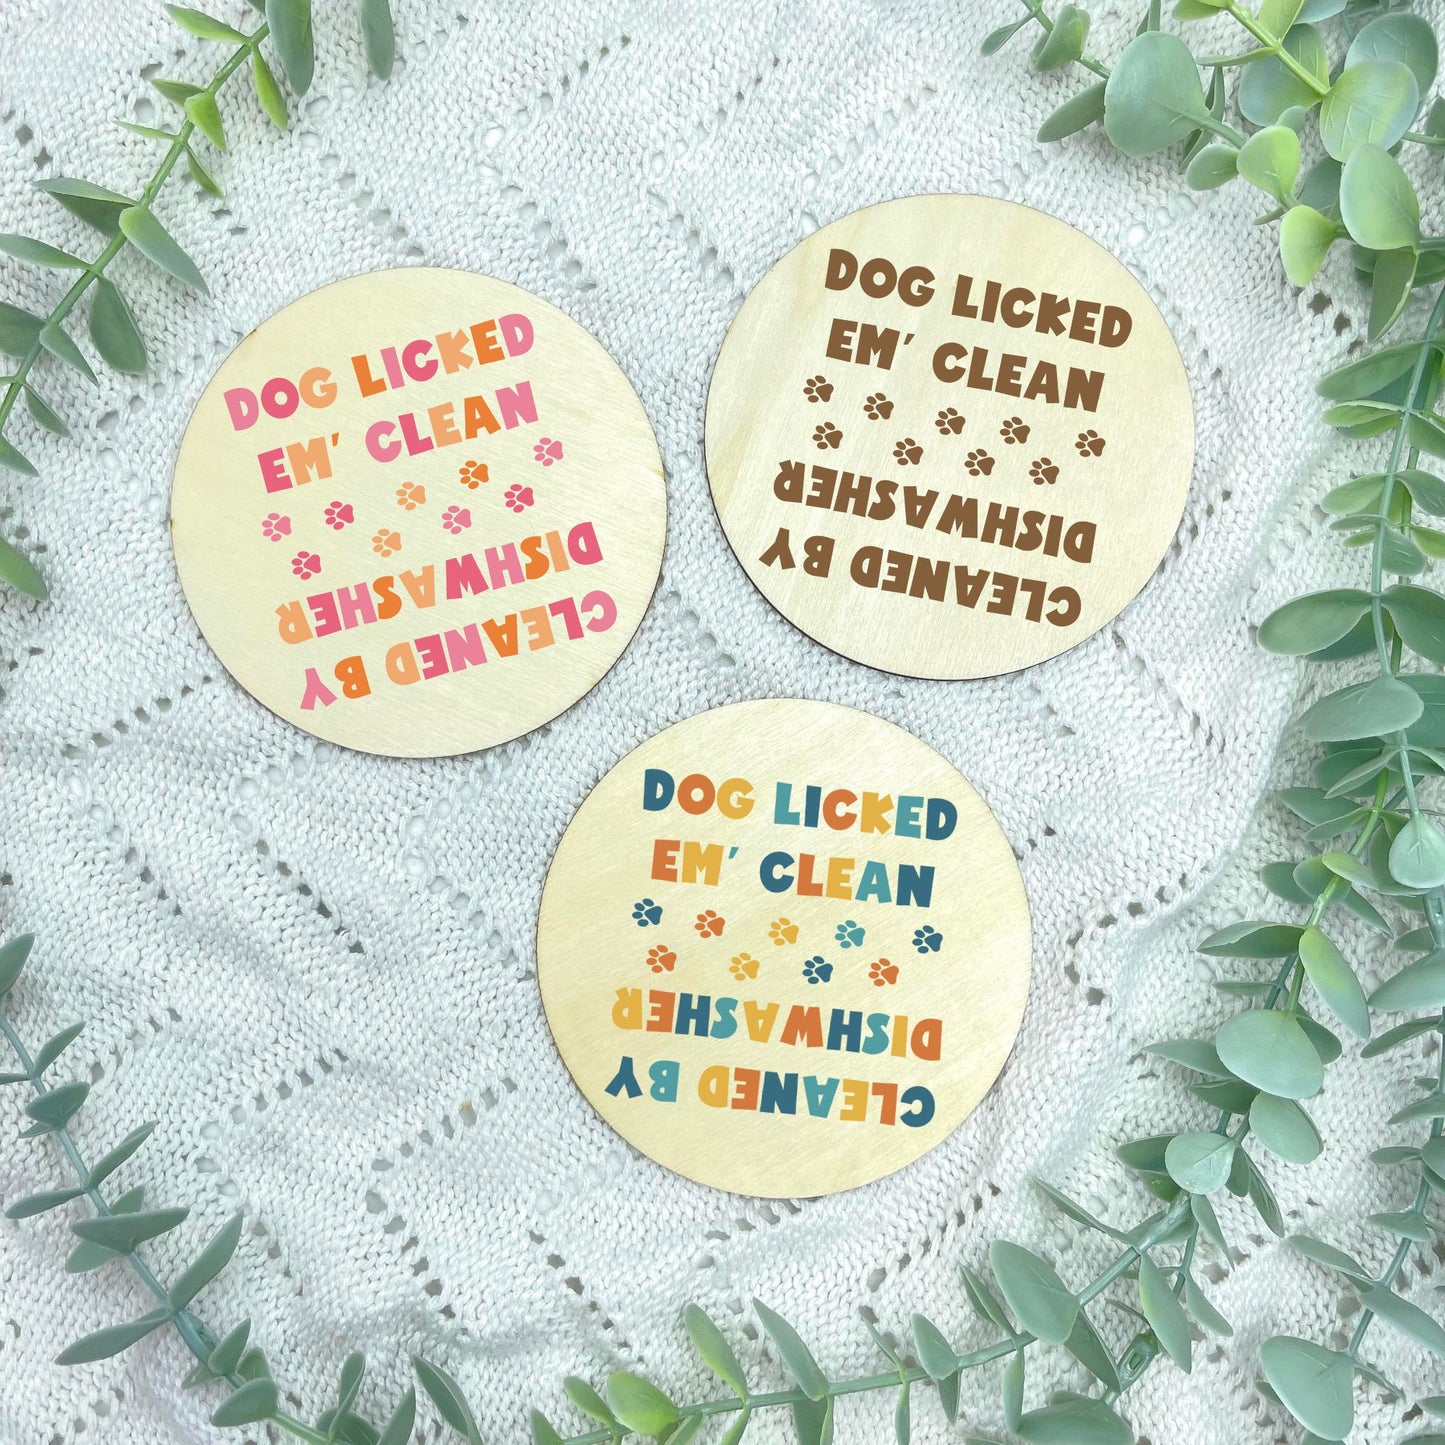 Dog licked it, dishwasher magnet, clean and dirty magnet, kitchen utensil